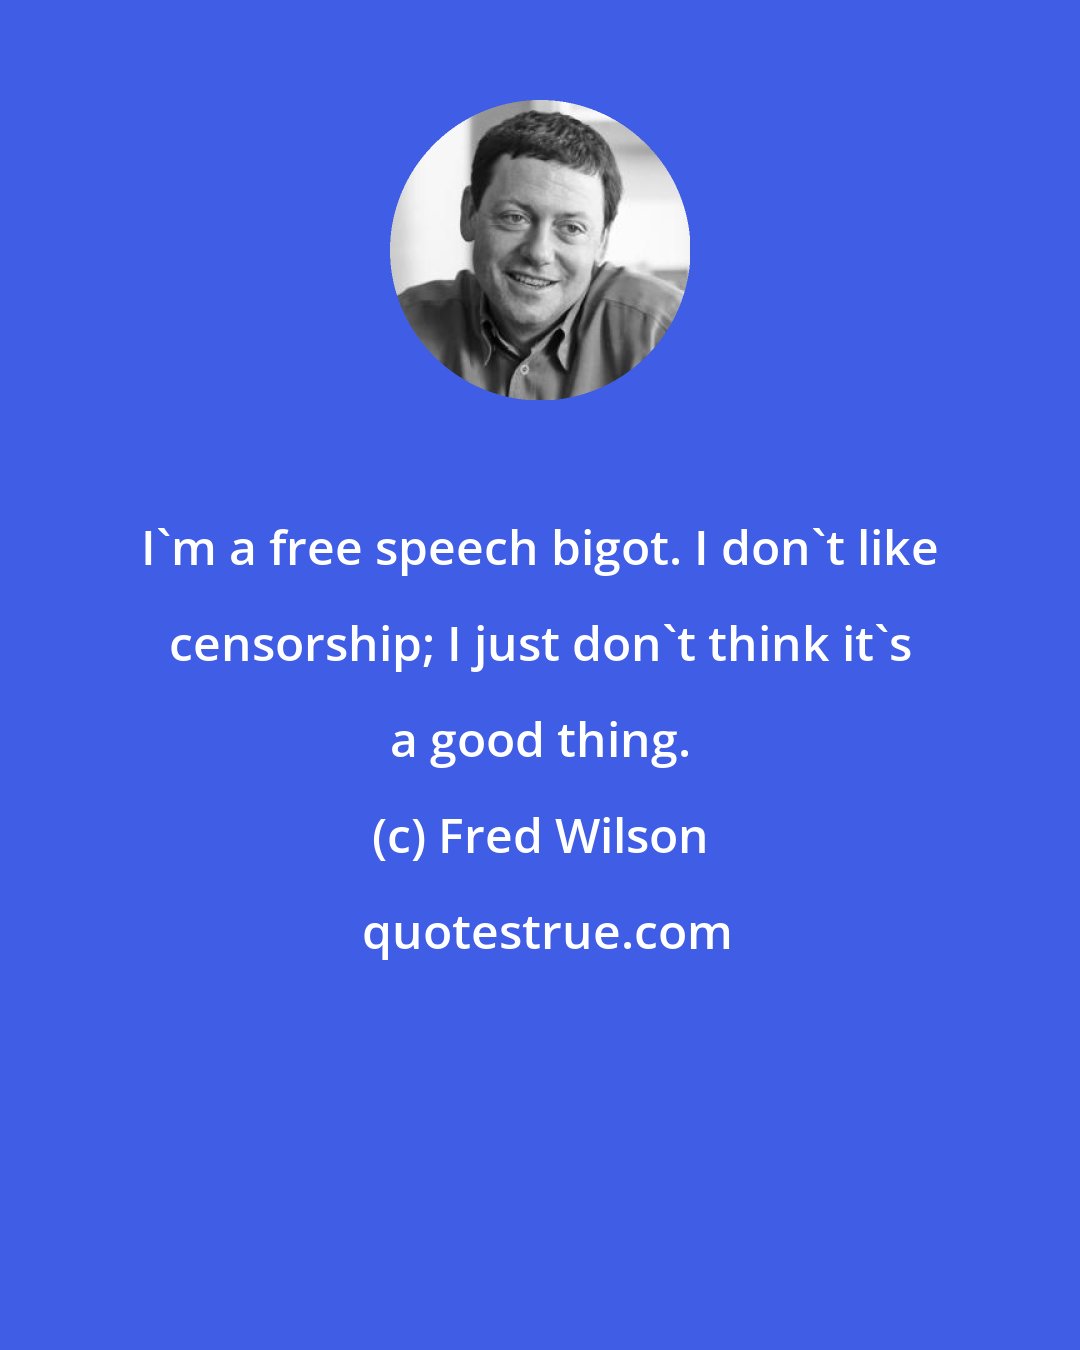 Fred Wilson: I'm a free speech bigot. I don't like censorship; I just don't think it's a good thing.